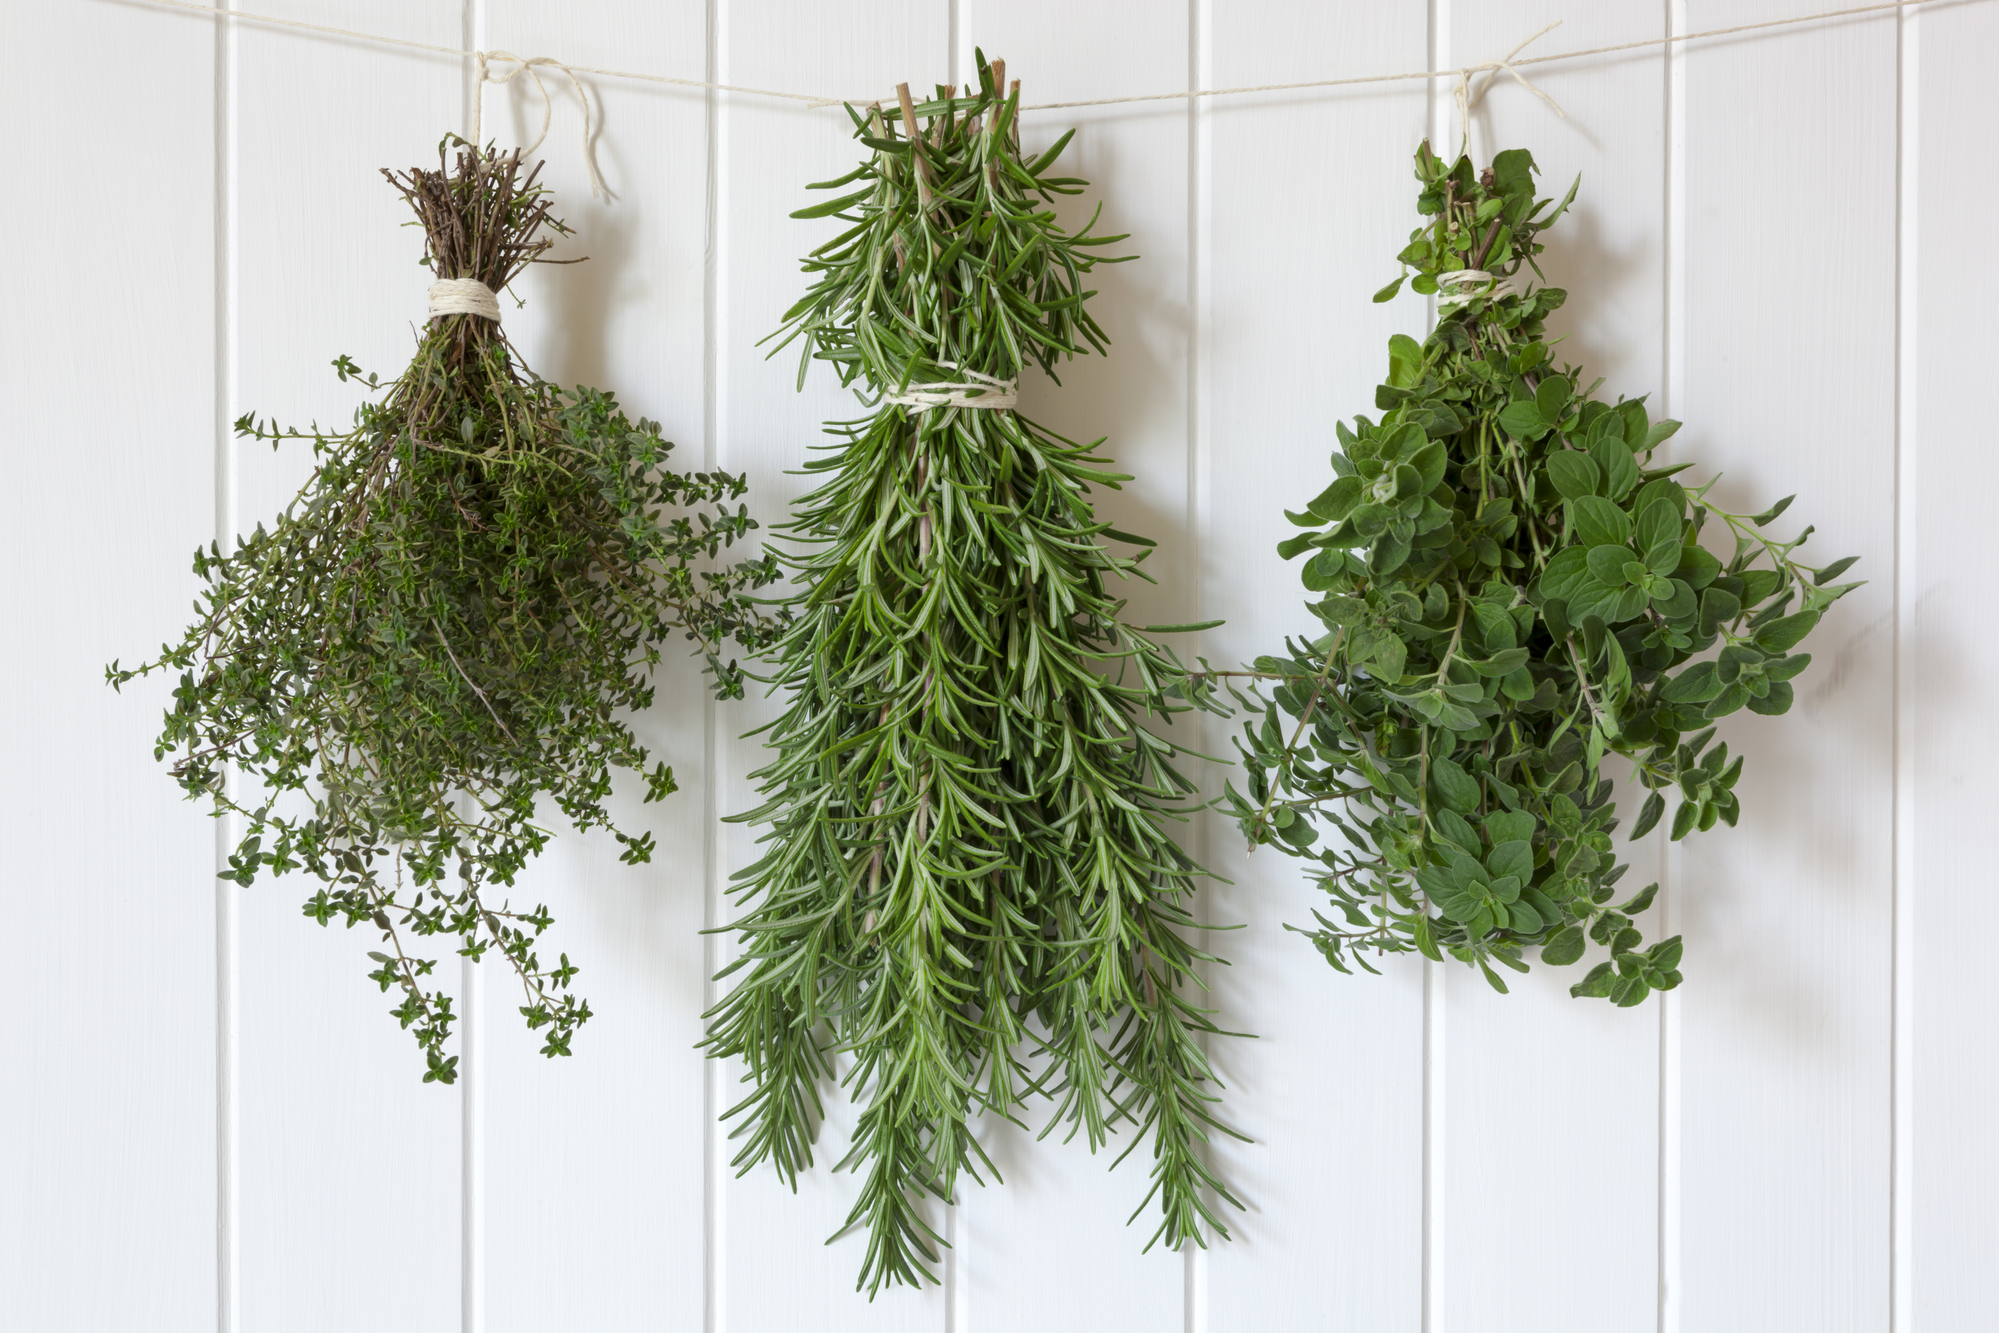 Bunches of fresh herbs hanging over white timber.  Includes thyme, rosemary and oregano.